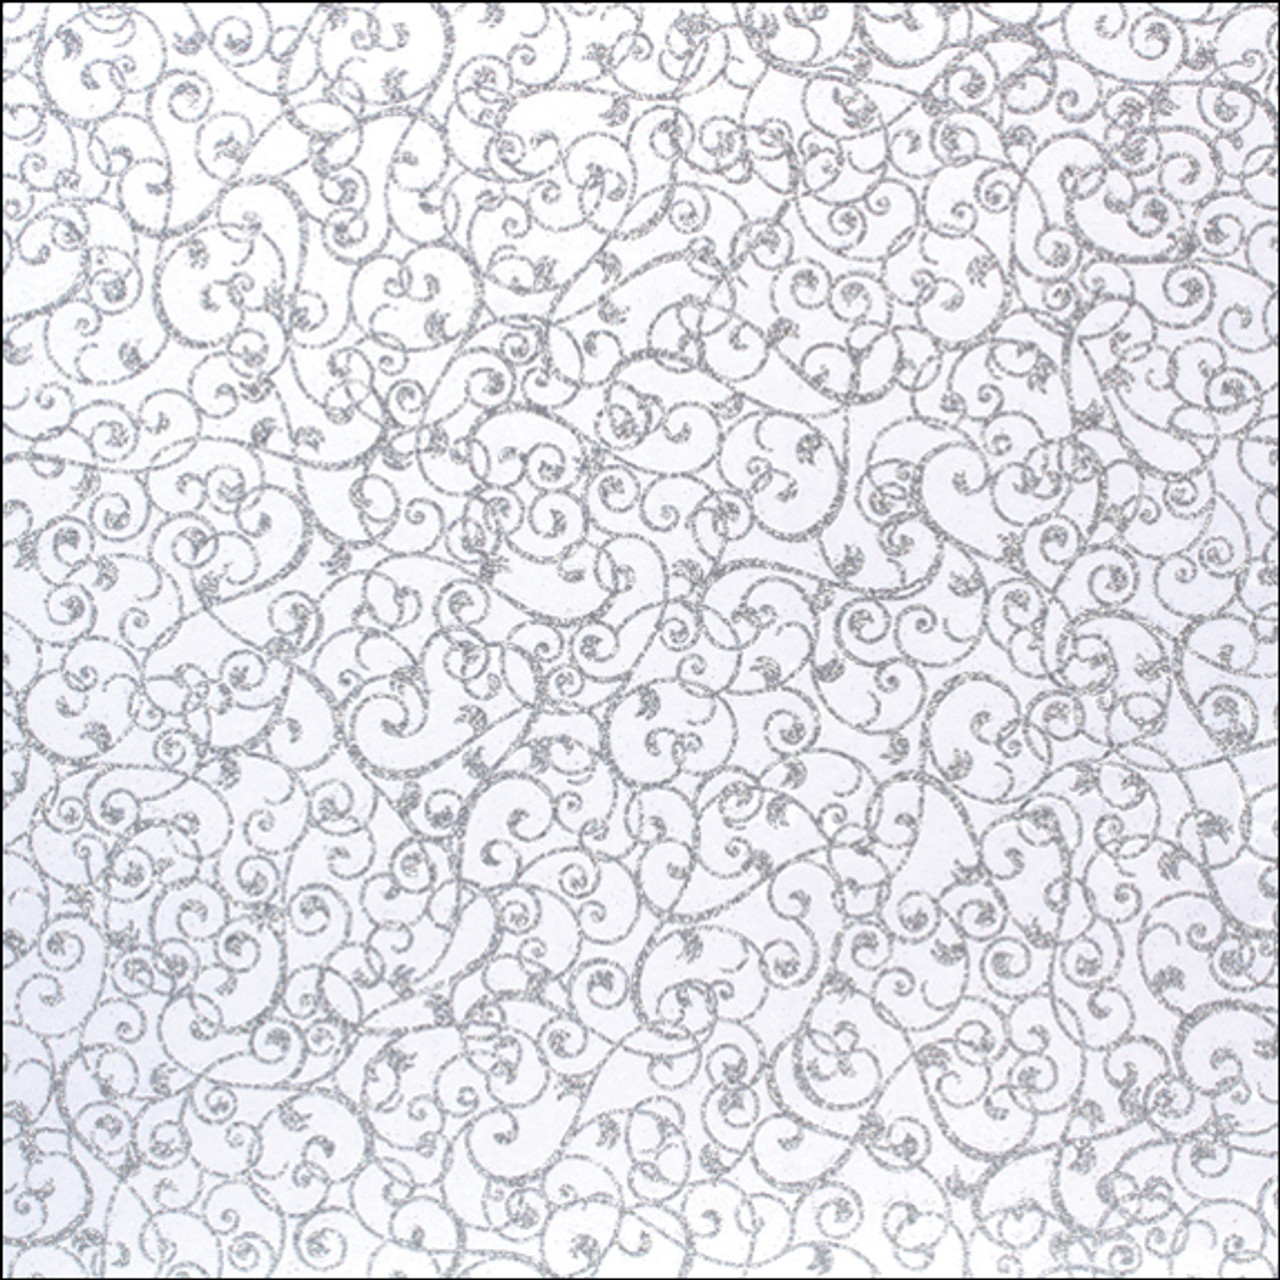 American Crafts Patterned Glitter Cardstock 12x12 Swirl/Silver